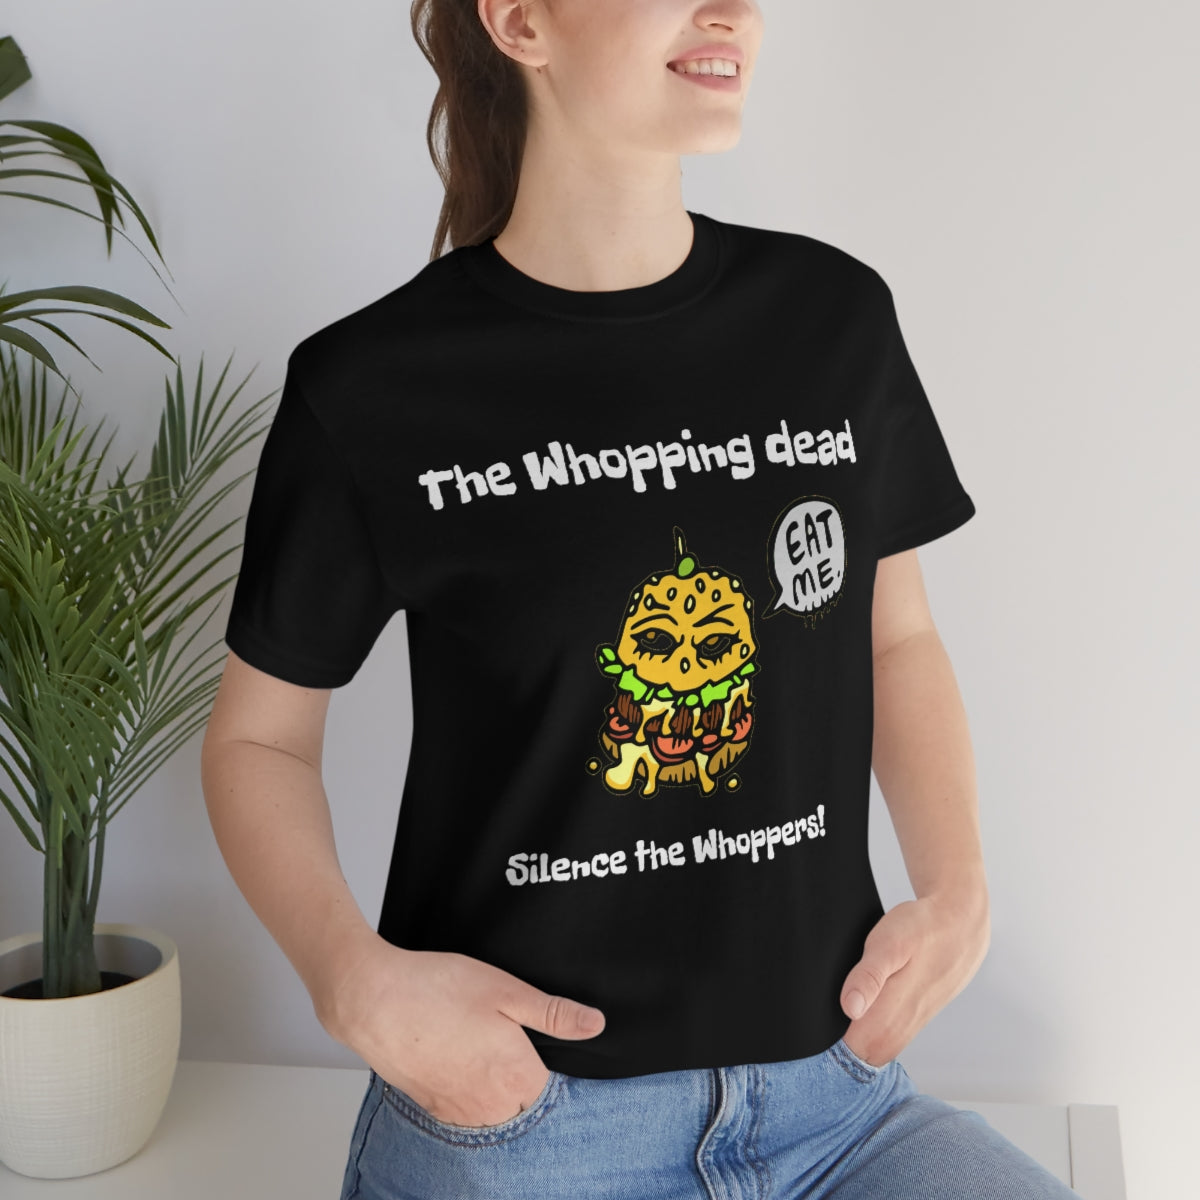 The whopping dead - Funny Fan - Unisex Short Sleeve Tee - CrazyTomTShirts